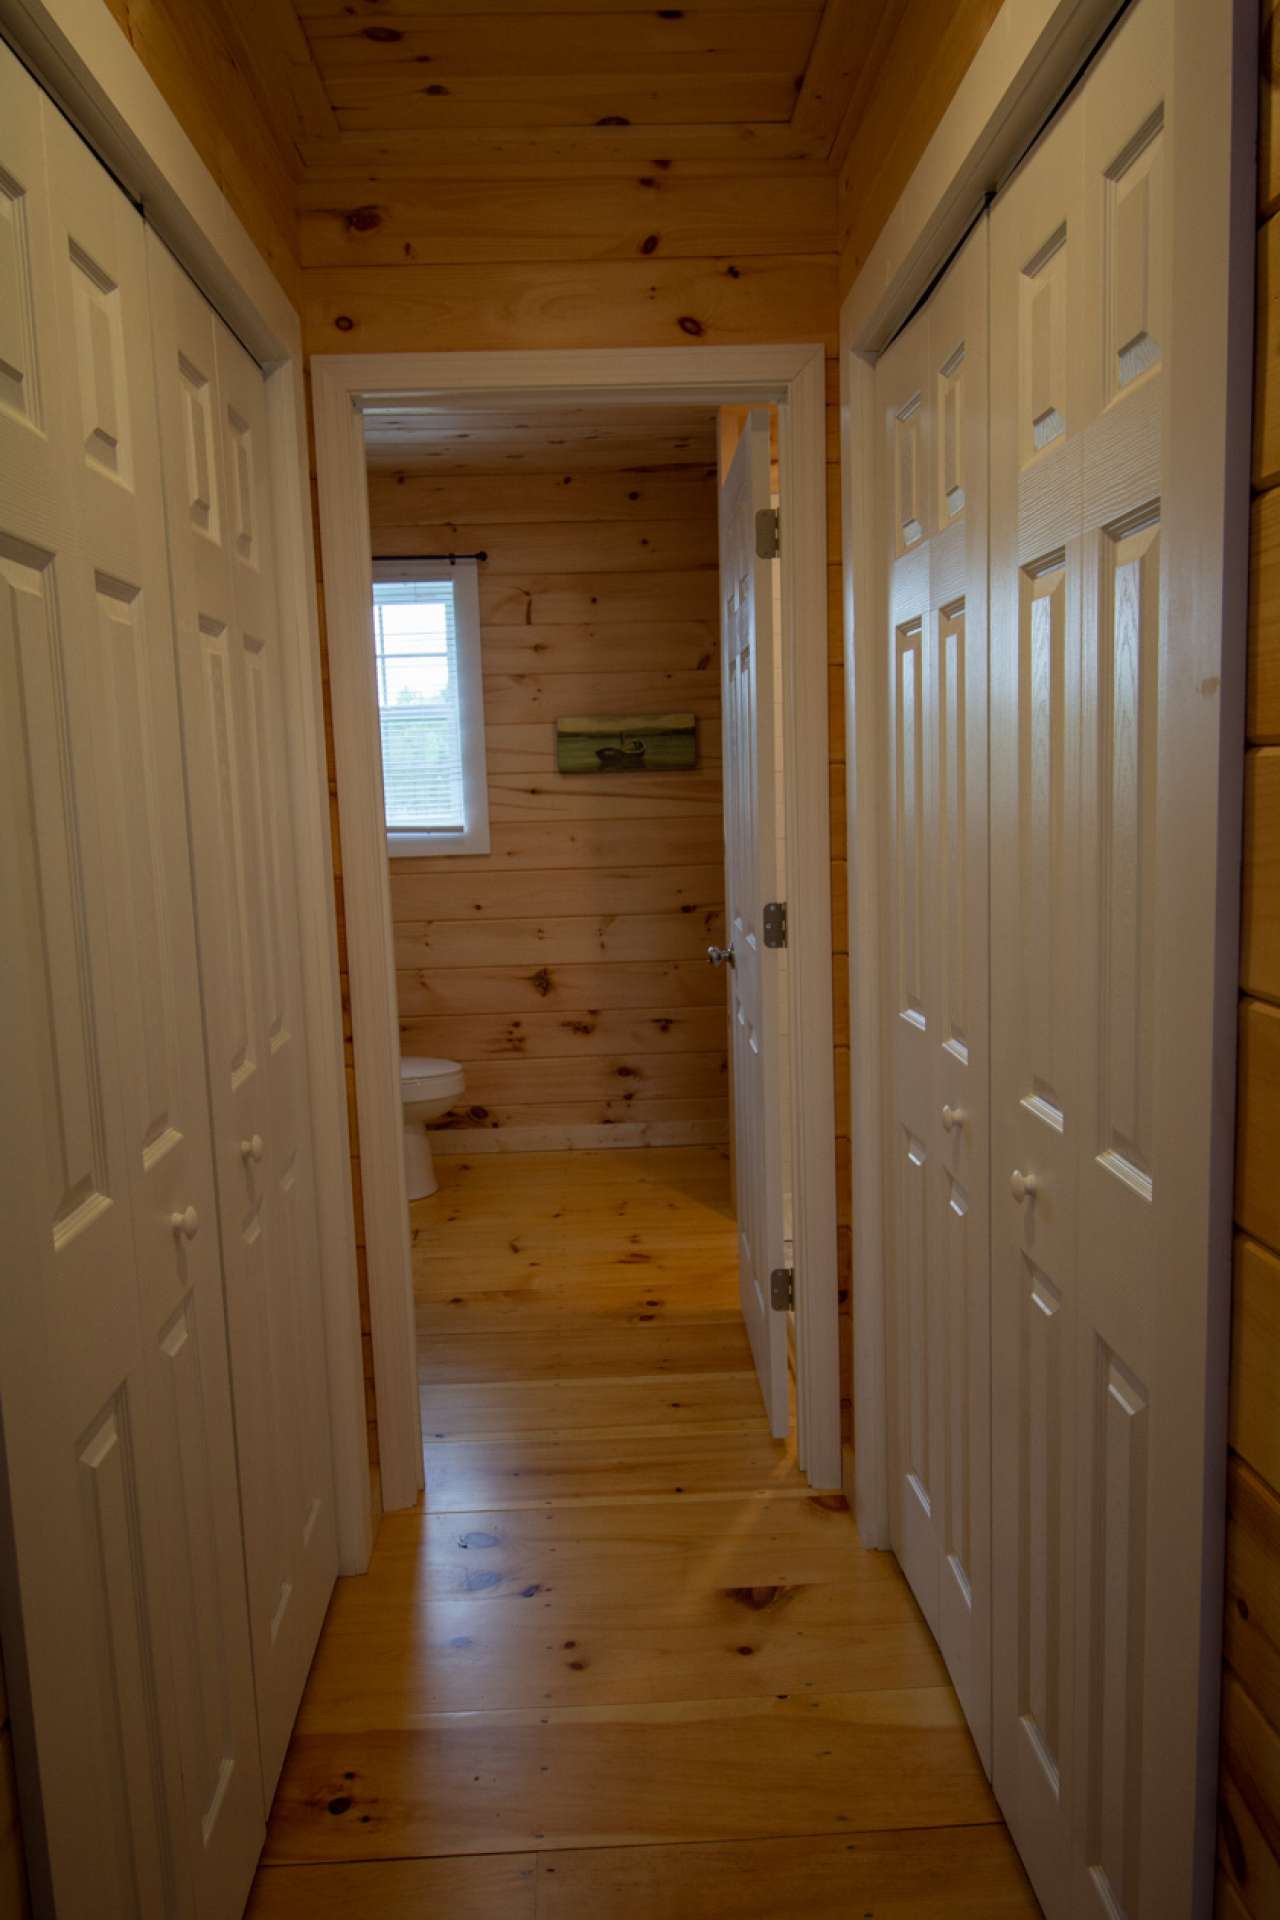 Third level hallway to bath with closets on each side.